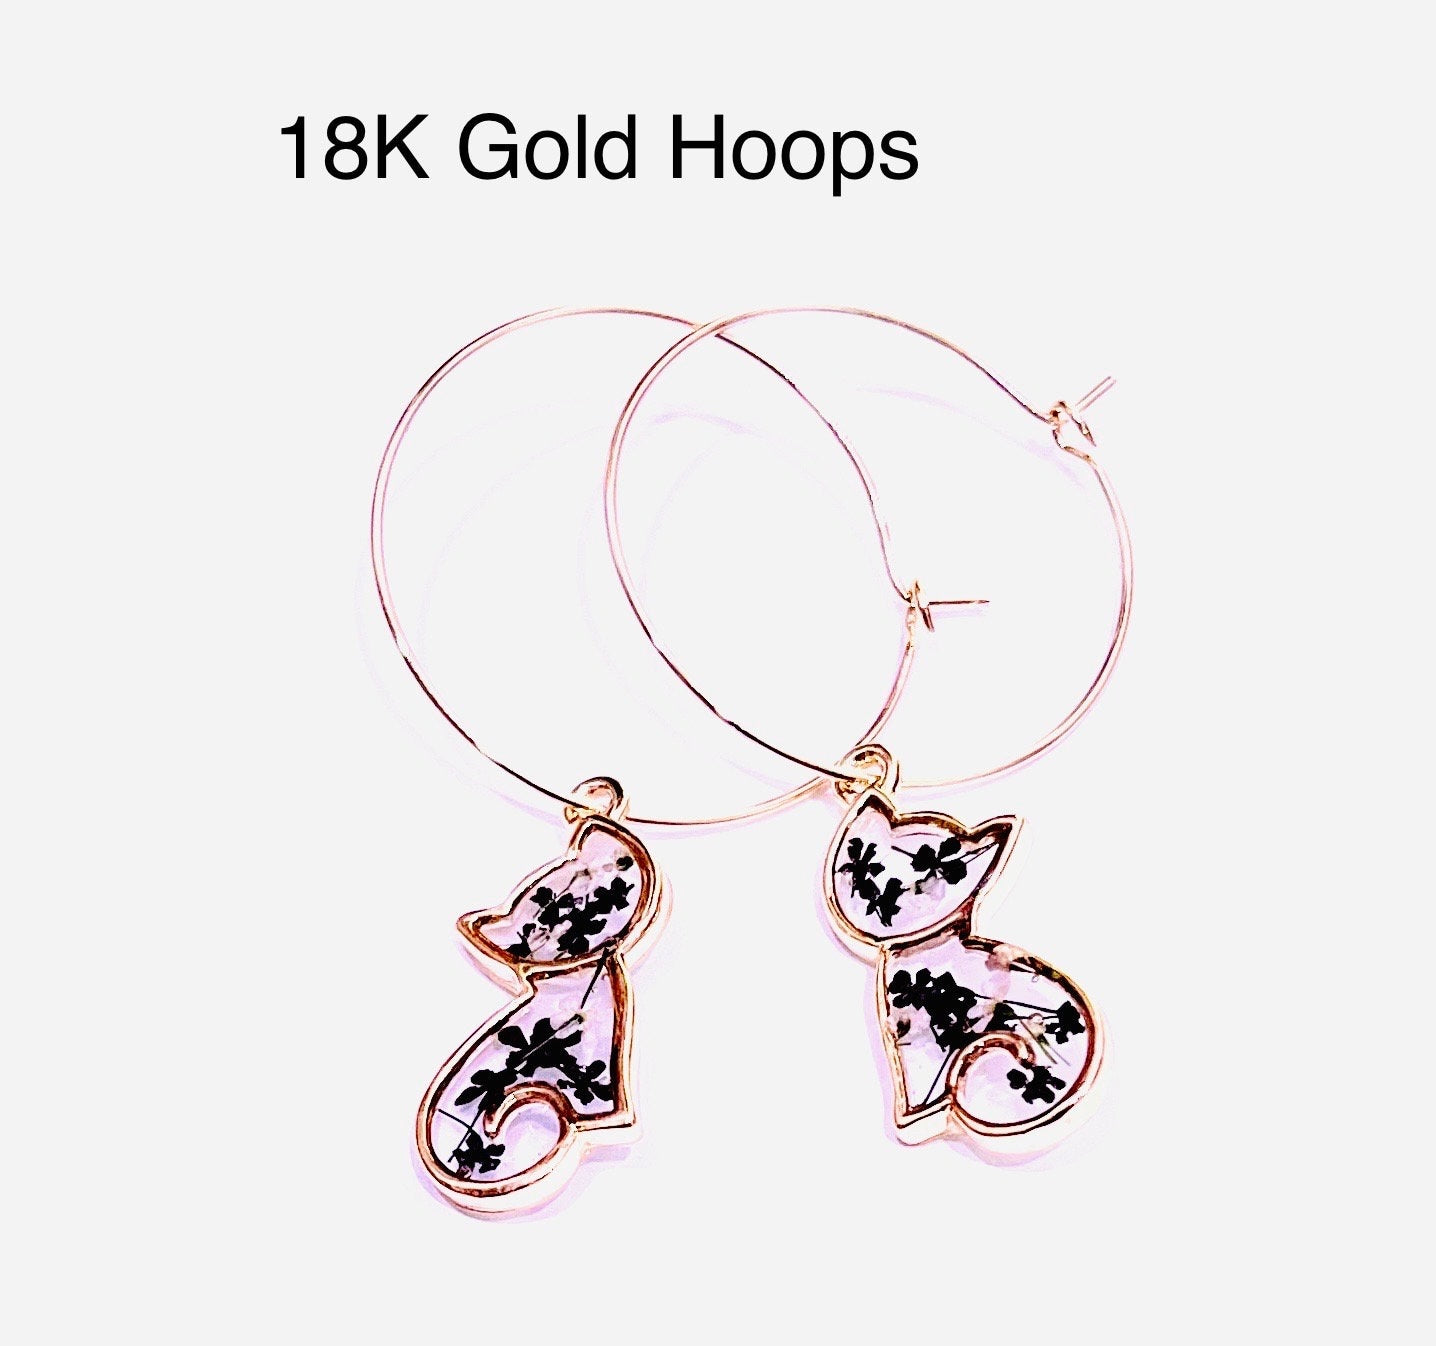 Tuxedo Cat Earrings. Black and White Queen Anne’s lace flowers. 14K white gold plated earrings. 18K Gold Hoops. Special Gift for Cat Lovers.